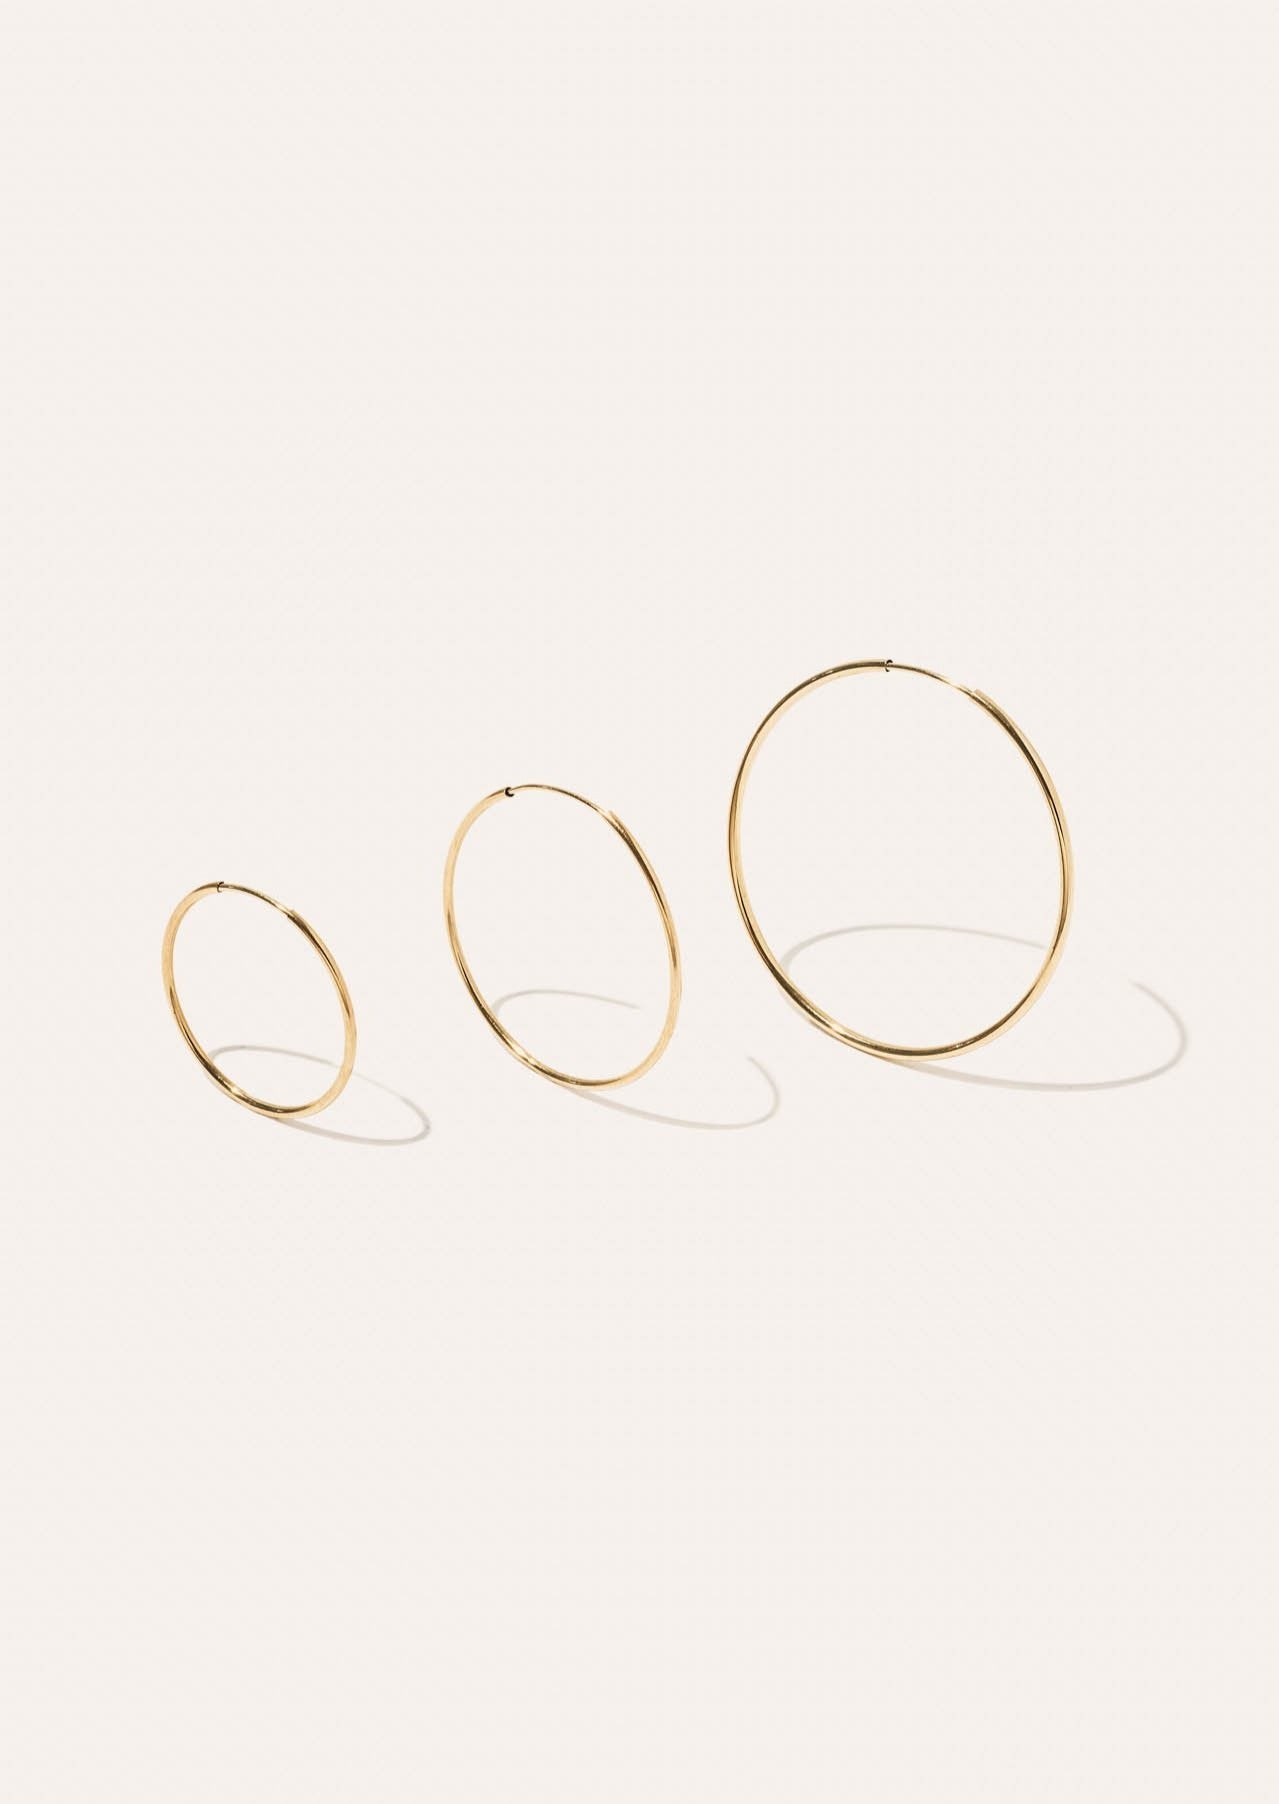 alt="Lightweight Hoop Earrings - Medium compared to the small and large"